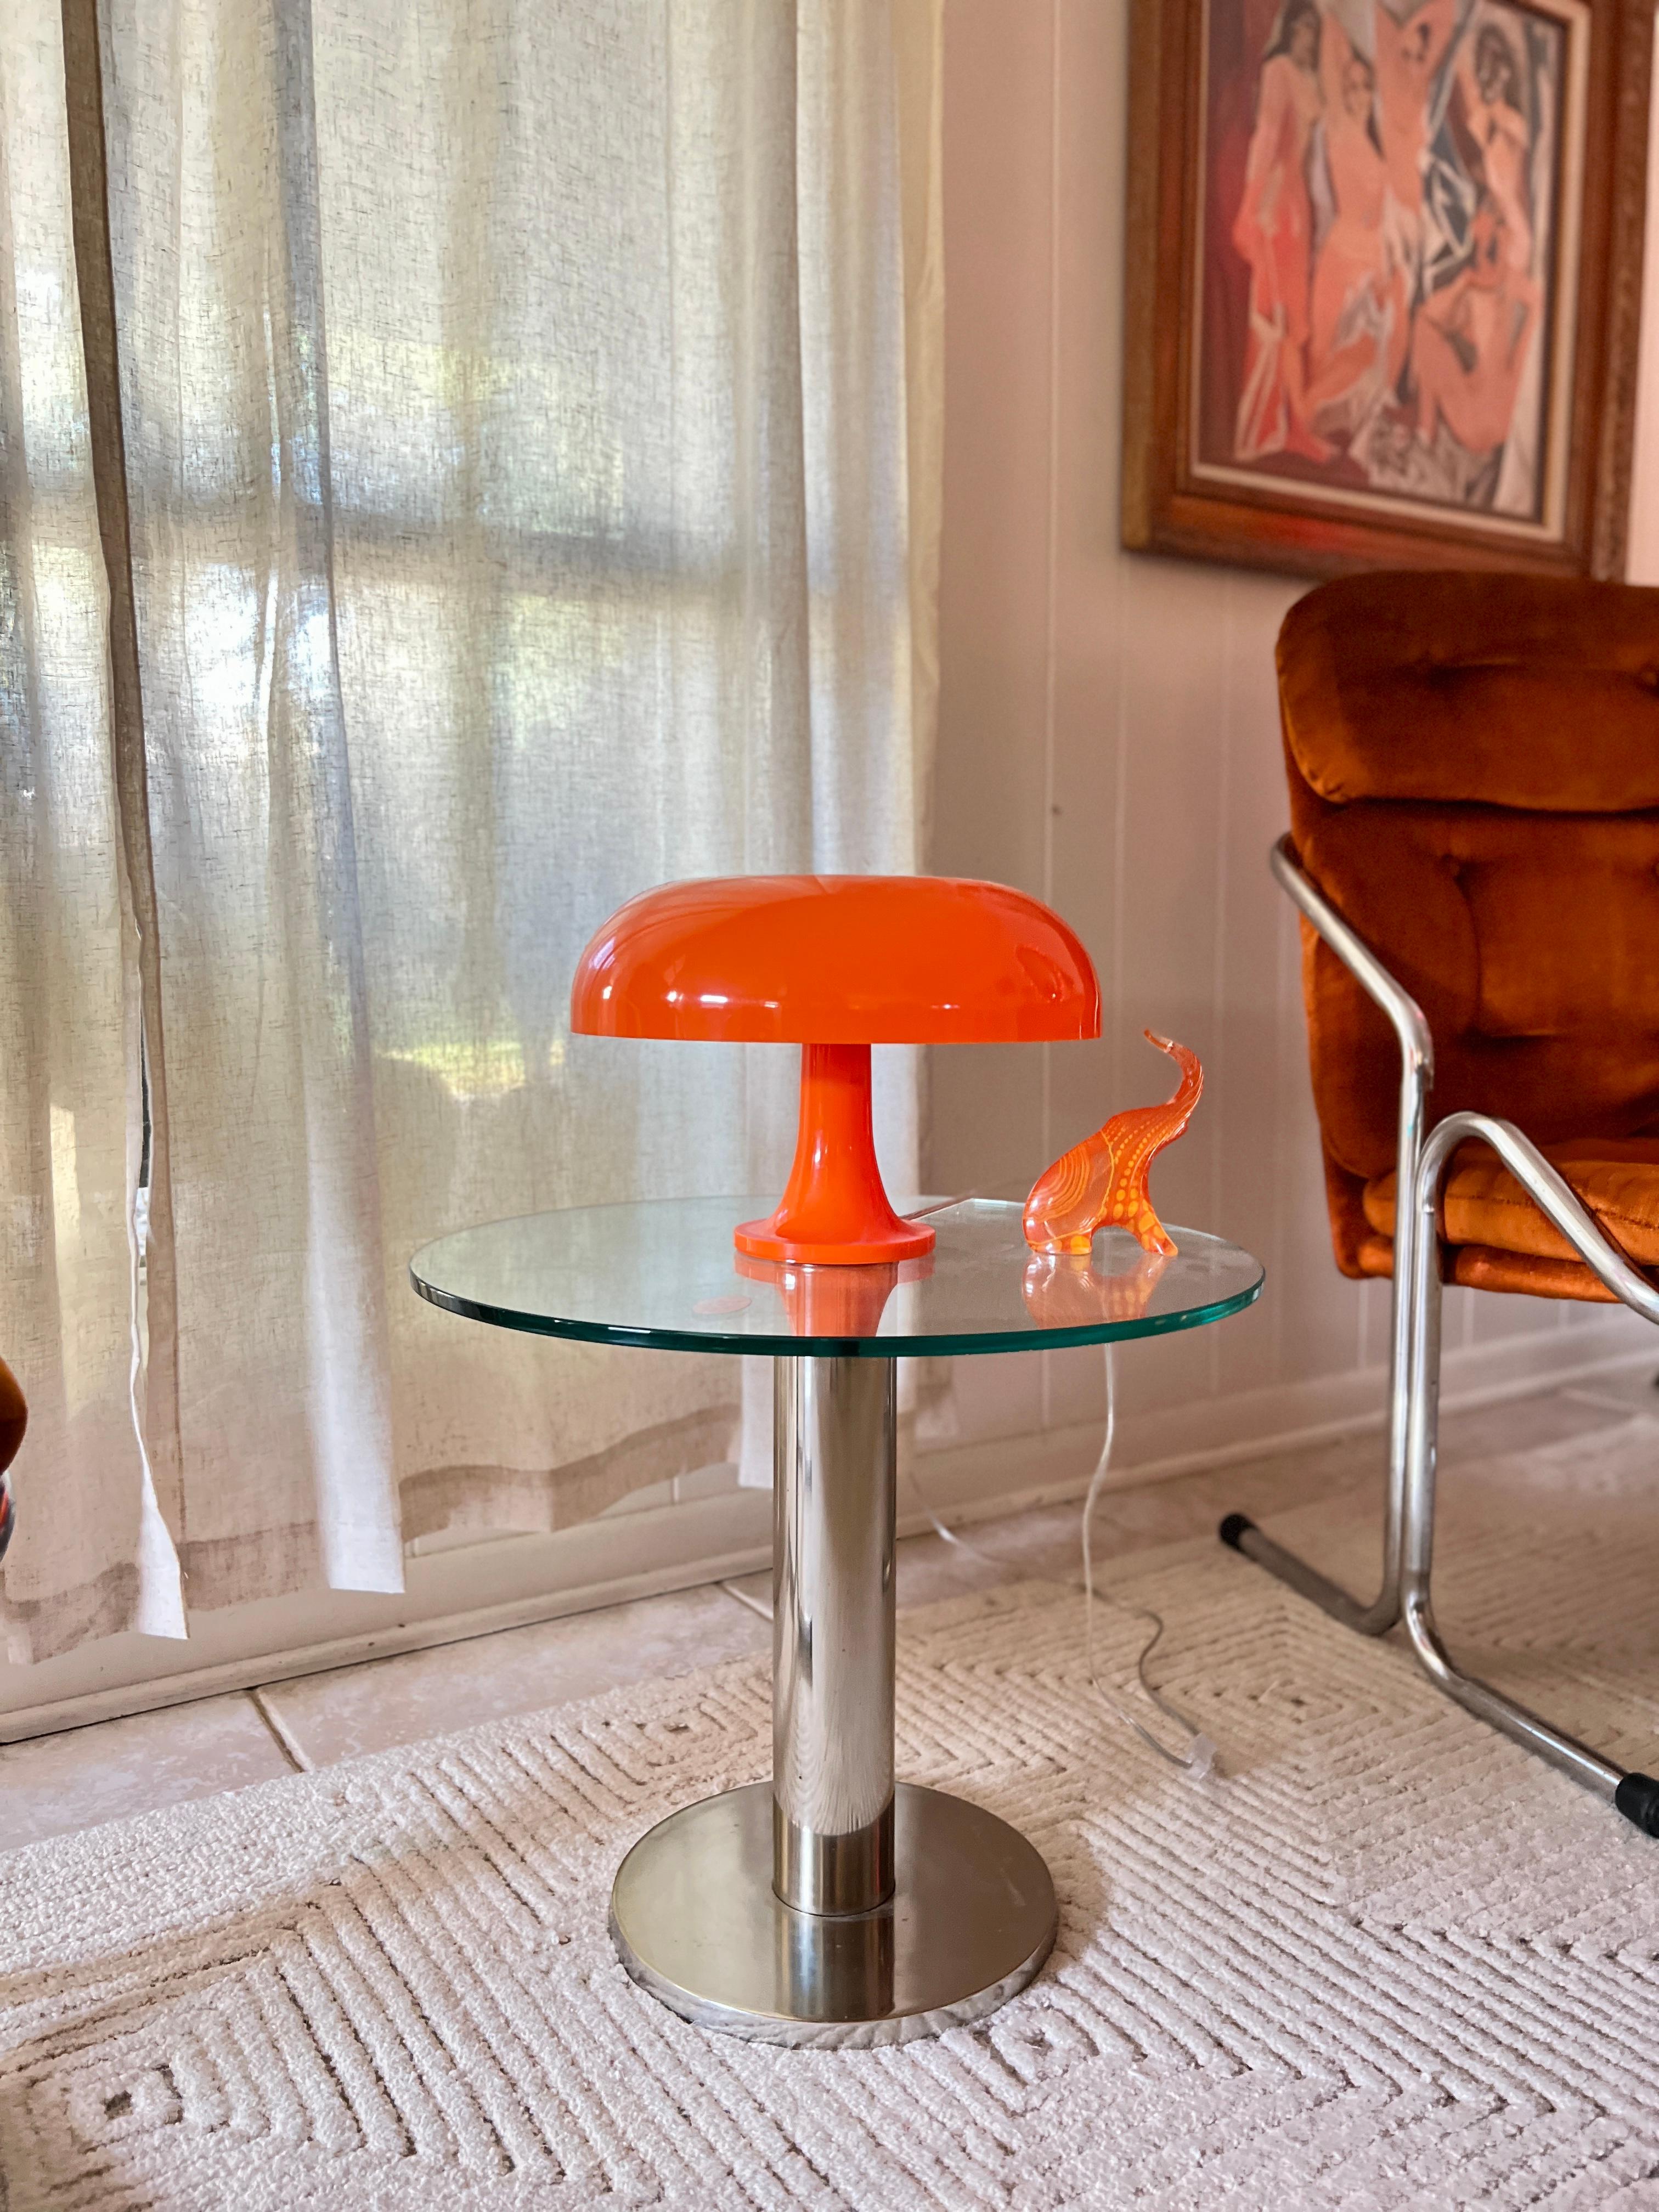 Glass Vintage glass and chrome side table by Mirodan, made in Belgium circa 1960s